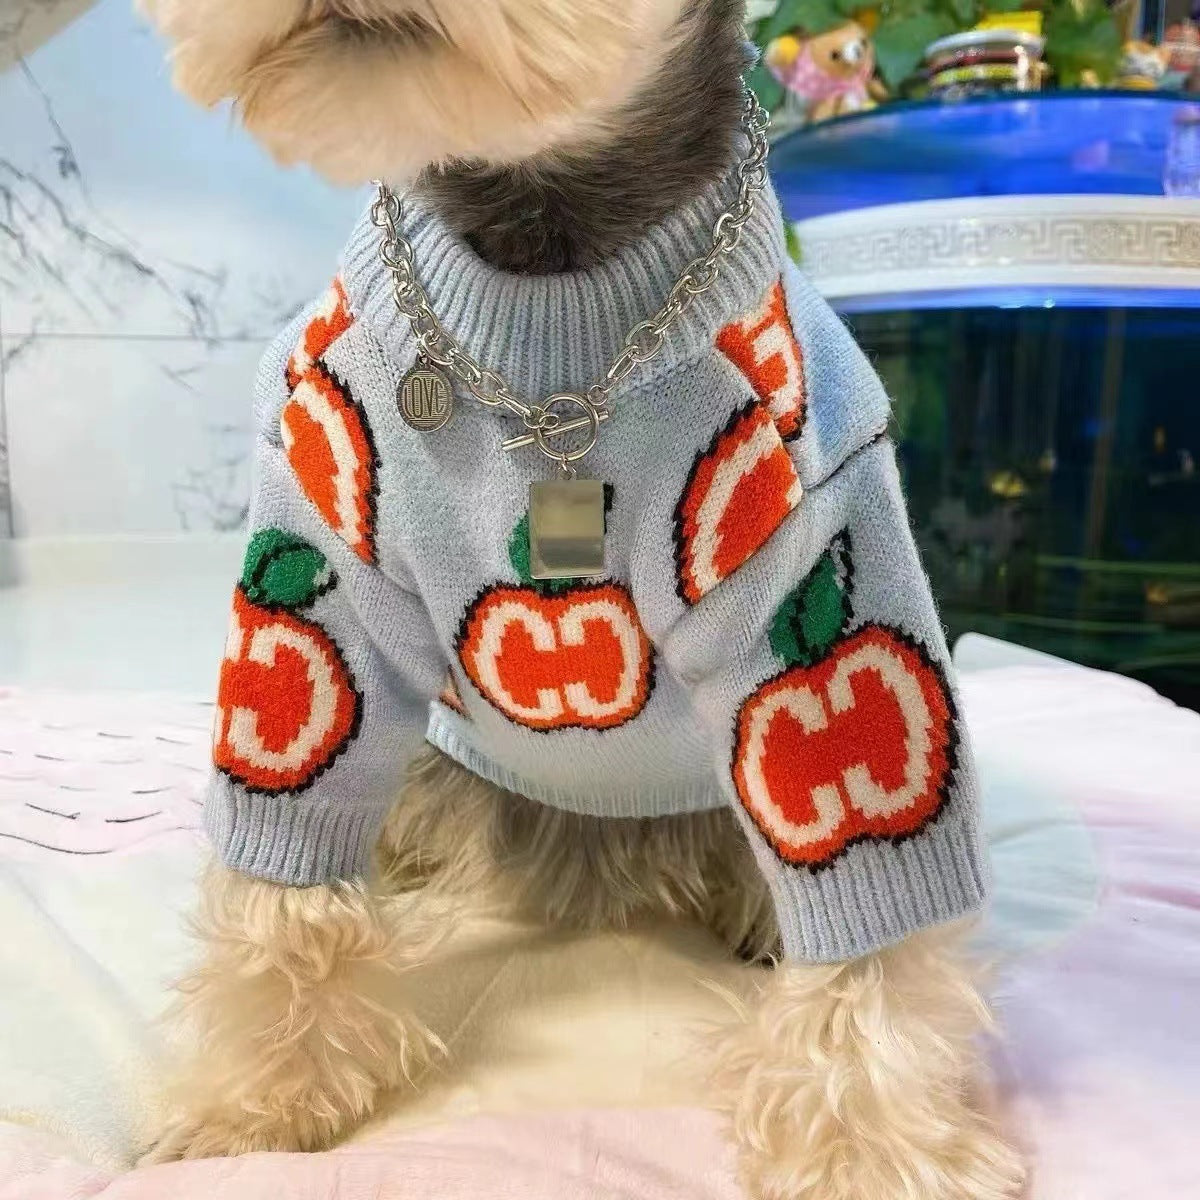 Padded Sweater For Dogs And Cats